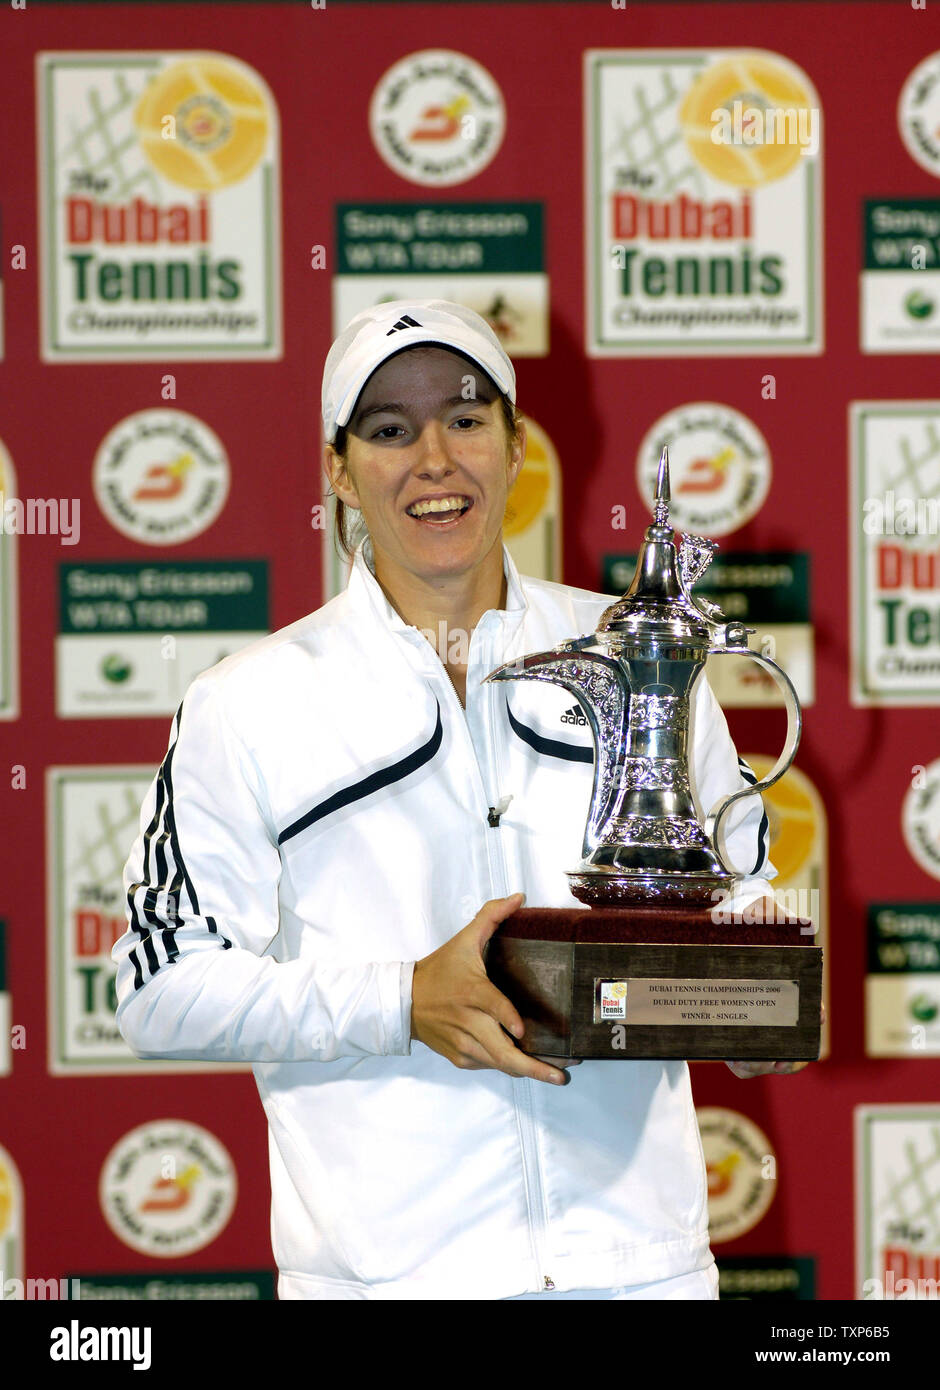 Justine Henin-Hardenne of Belgium seen with trophy after defeating Maria  Sharpova of Russia 7-5, 6-2 in the finals of the Dubai Tennis Championships  in Dubai, United Arab Emirates on February 25, 2006.